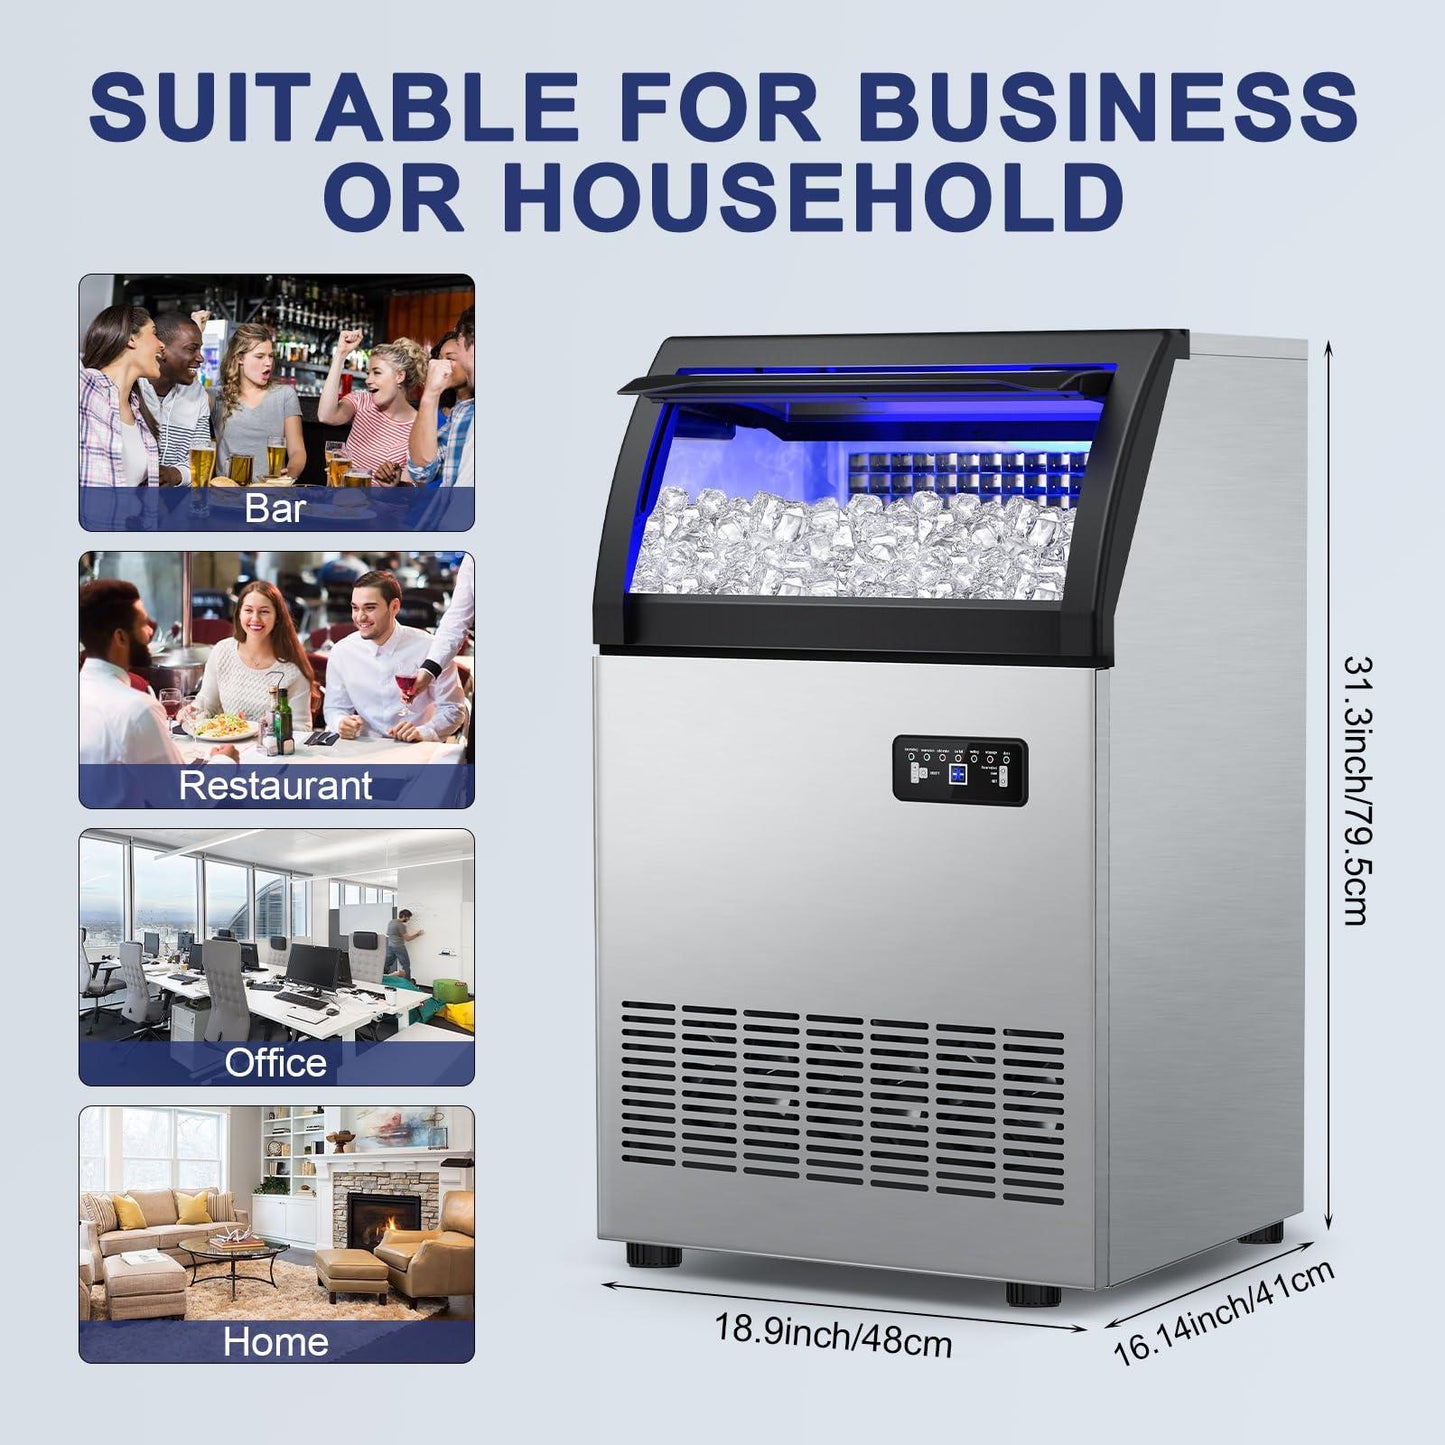 Commercial Ice Maker Machine 200LBS/24H with 55LBS Ice Capacity Bin, 72Pcs Clear Ice Cubes Ready in 11-20Mins, Stainless Steel Under Counter Freestanding Ice Machine for Home Party Bar, Restaurant - CookCave